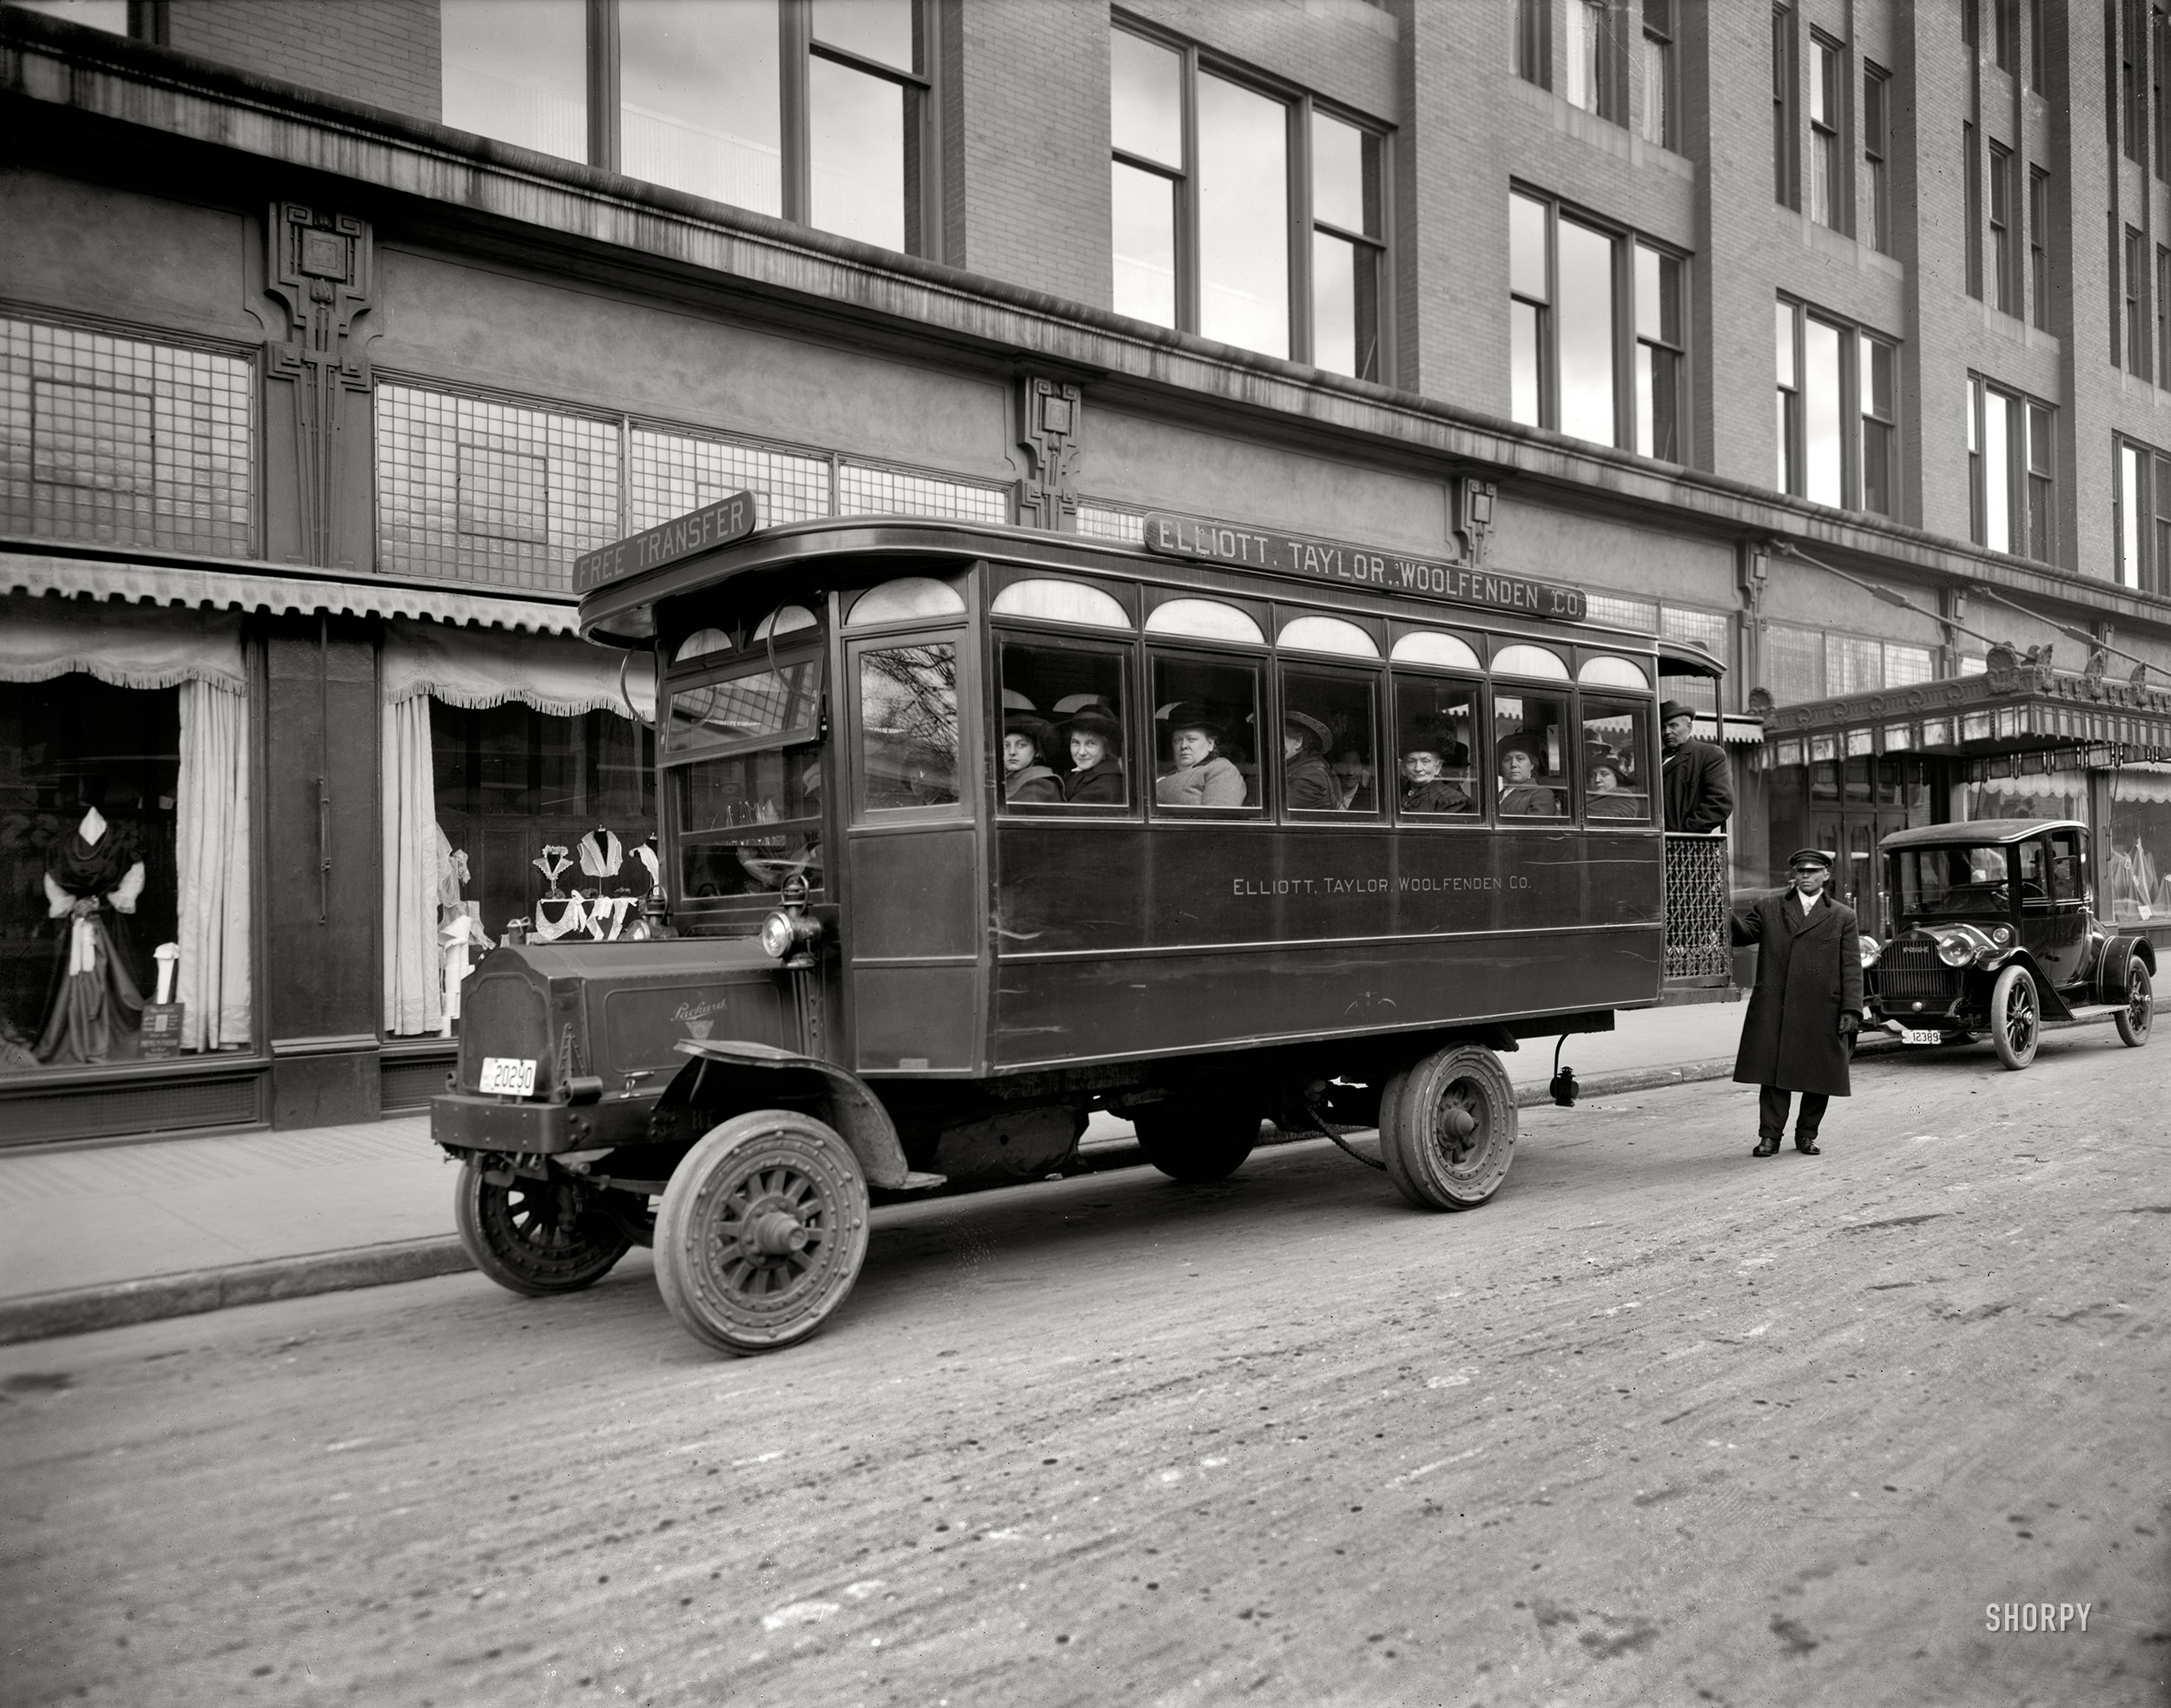 Detroit circa 1914. "Free transfer auto -- Elliott, Taylor, Woolfenden Co." 8x10 inch dry plate glass negative, Detroit Publishing Company. View full size.